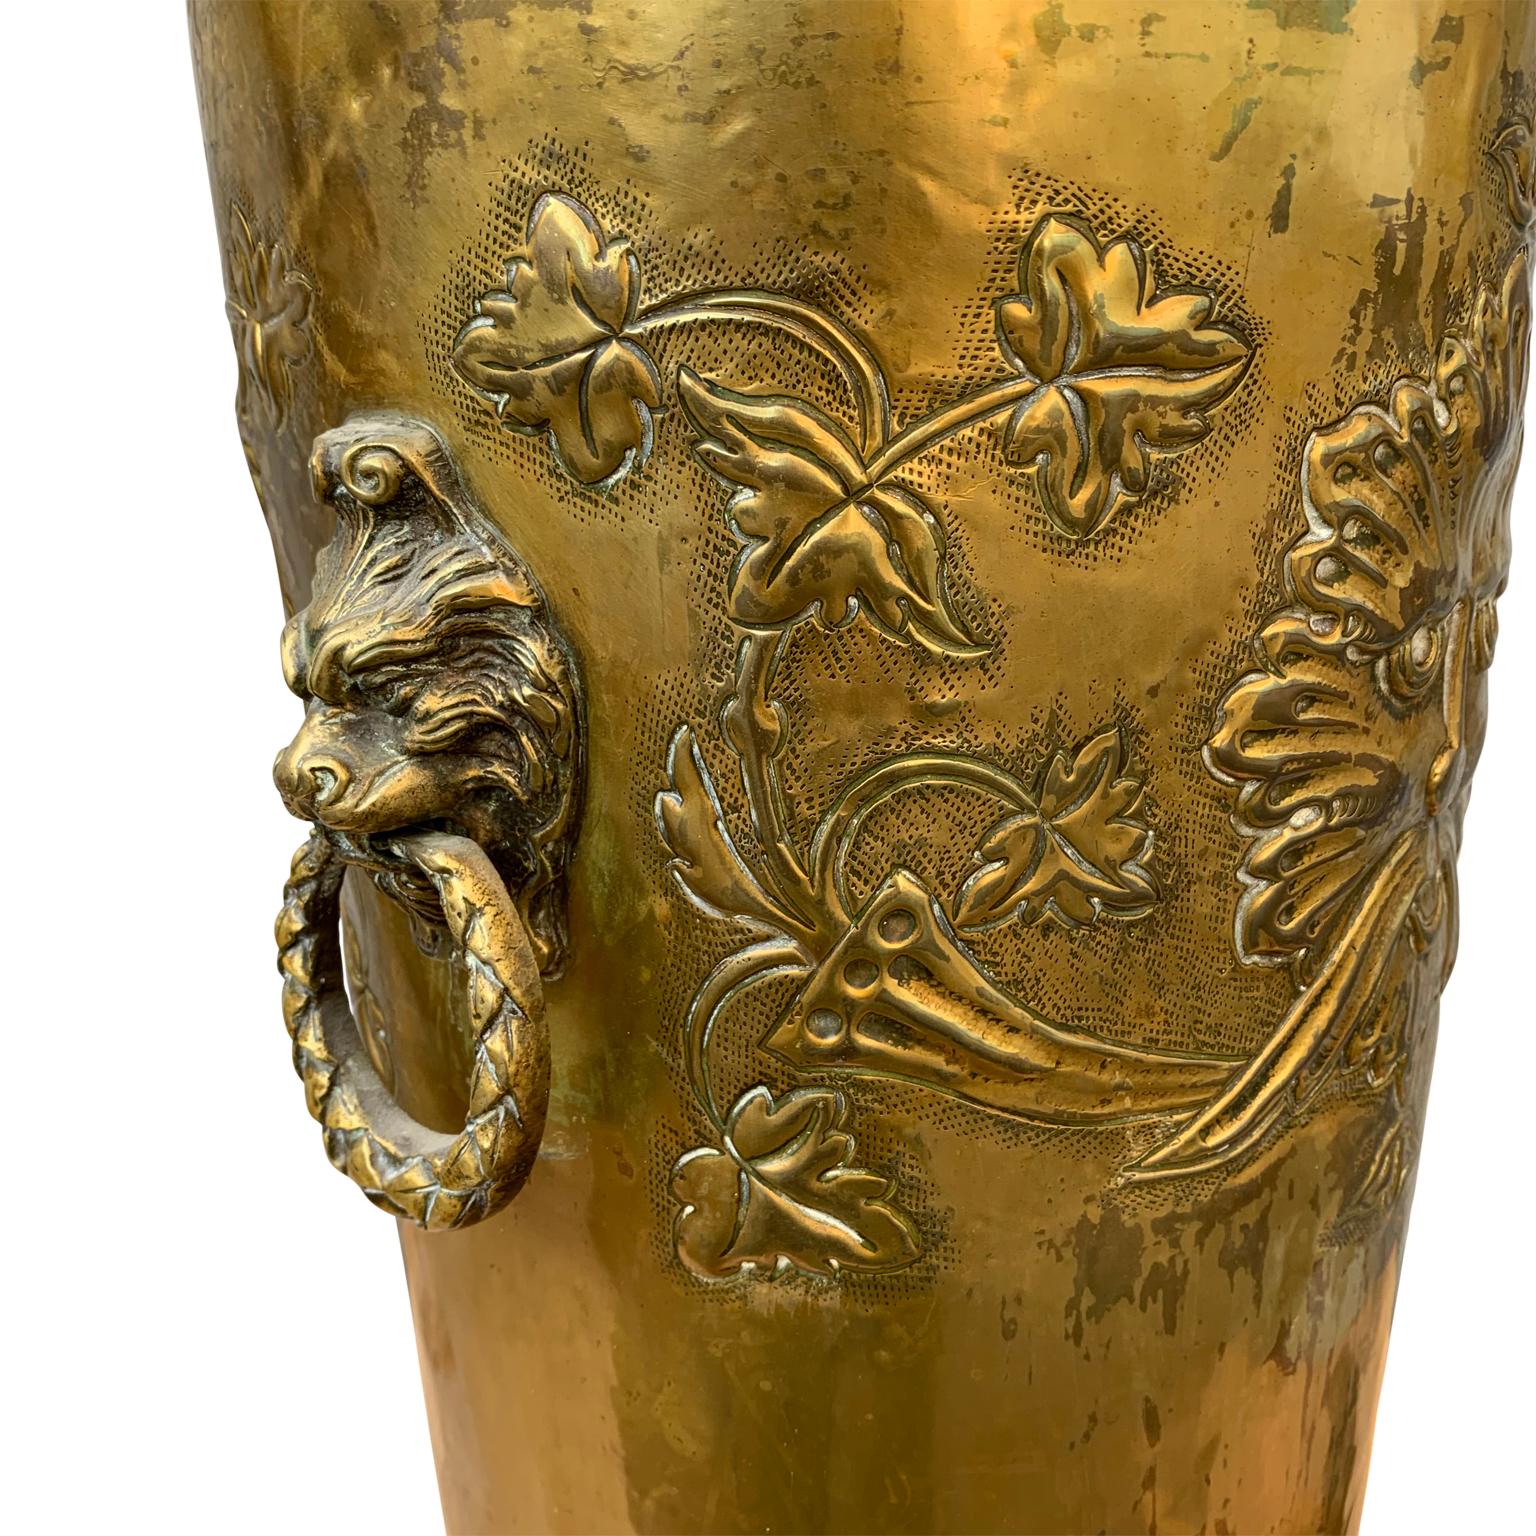 Belgian 19th Century Brass Umbrella Stand with Mythological Decorations